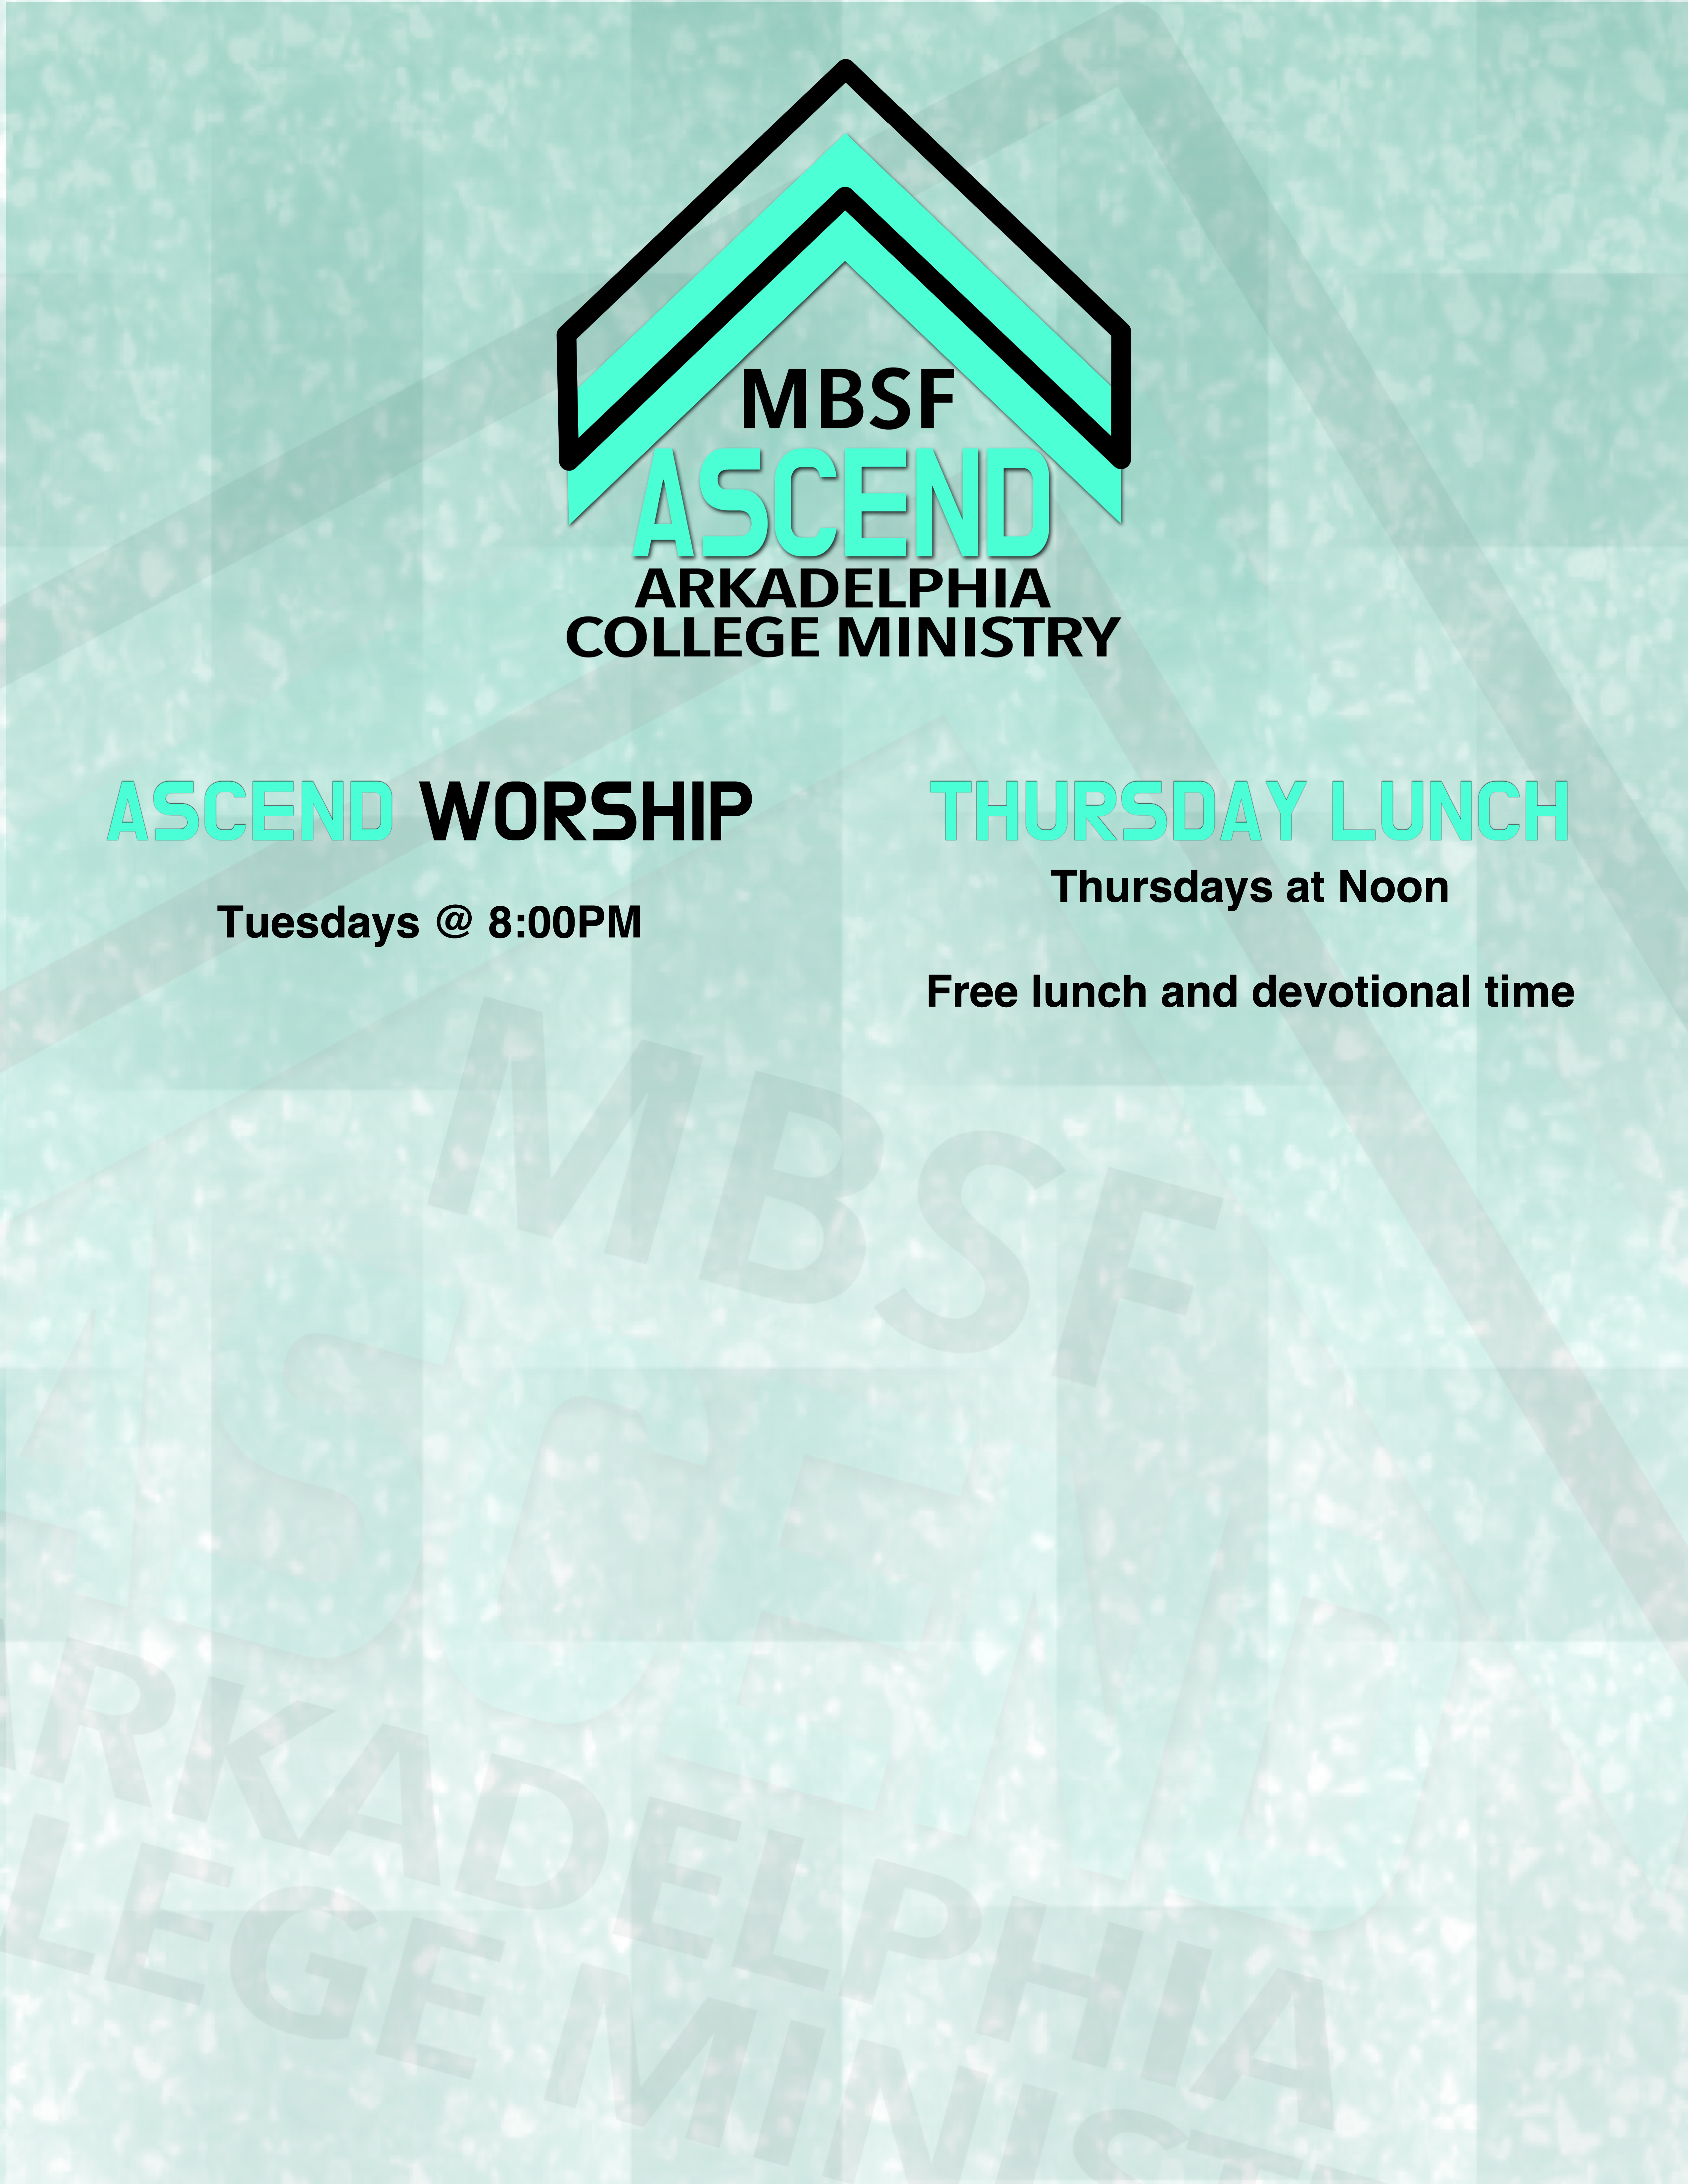 Weekly Schedule for MBSF